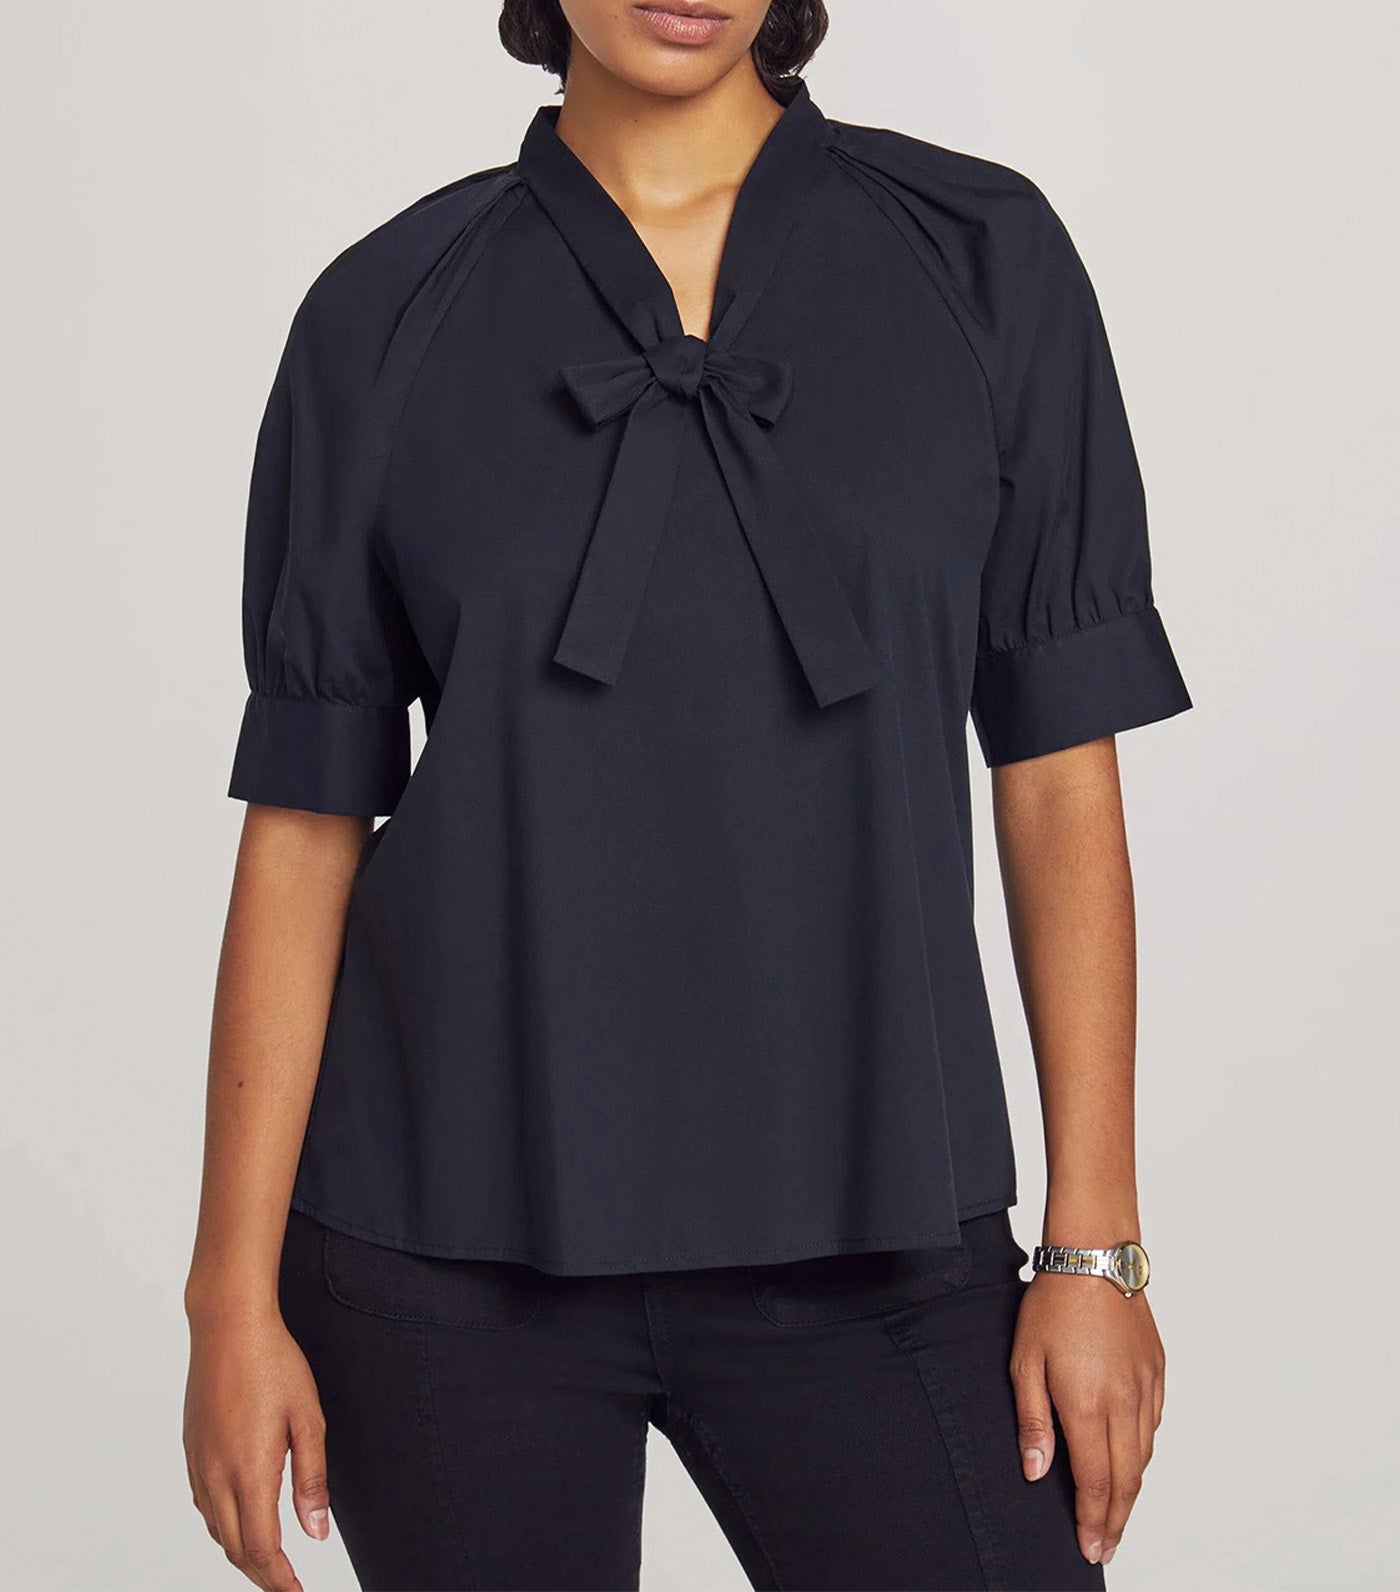 Elbow Length Puff Sleeve Blouse with Necktie Anne Black